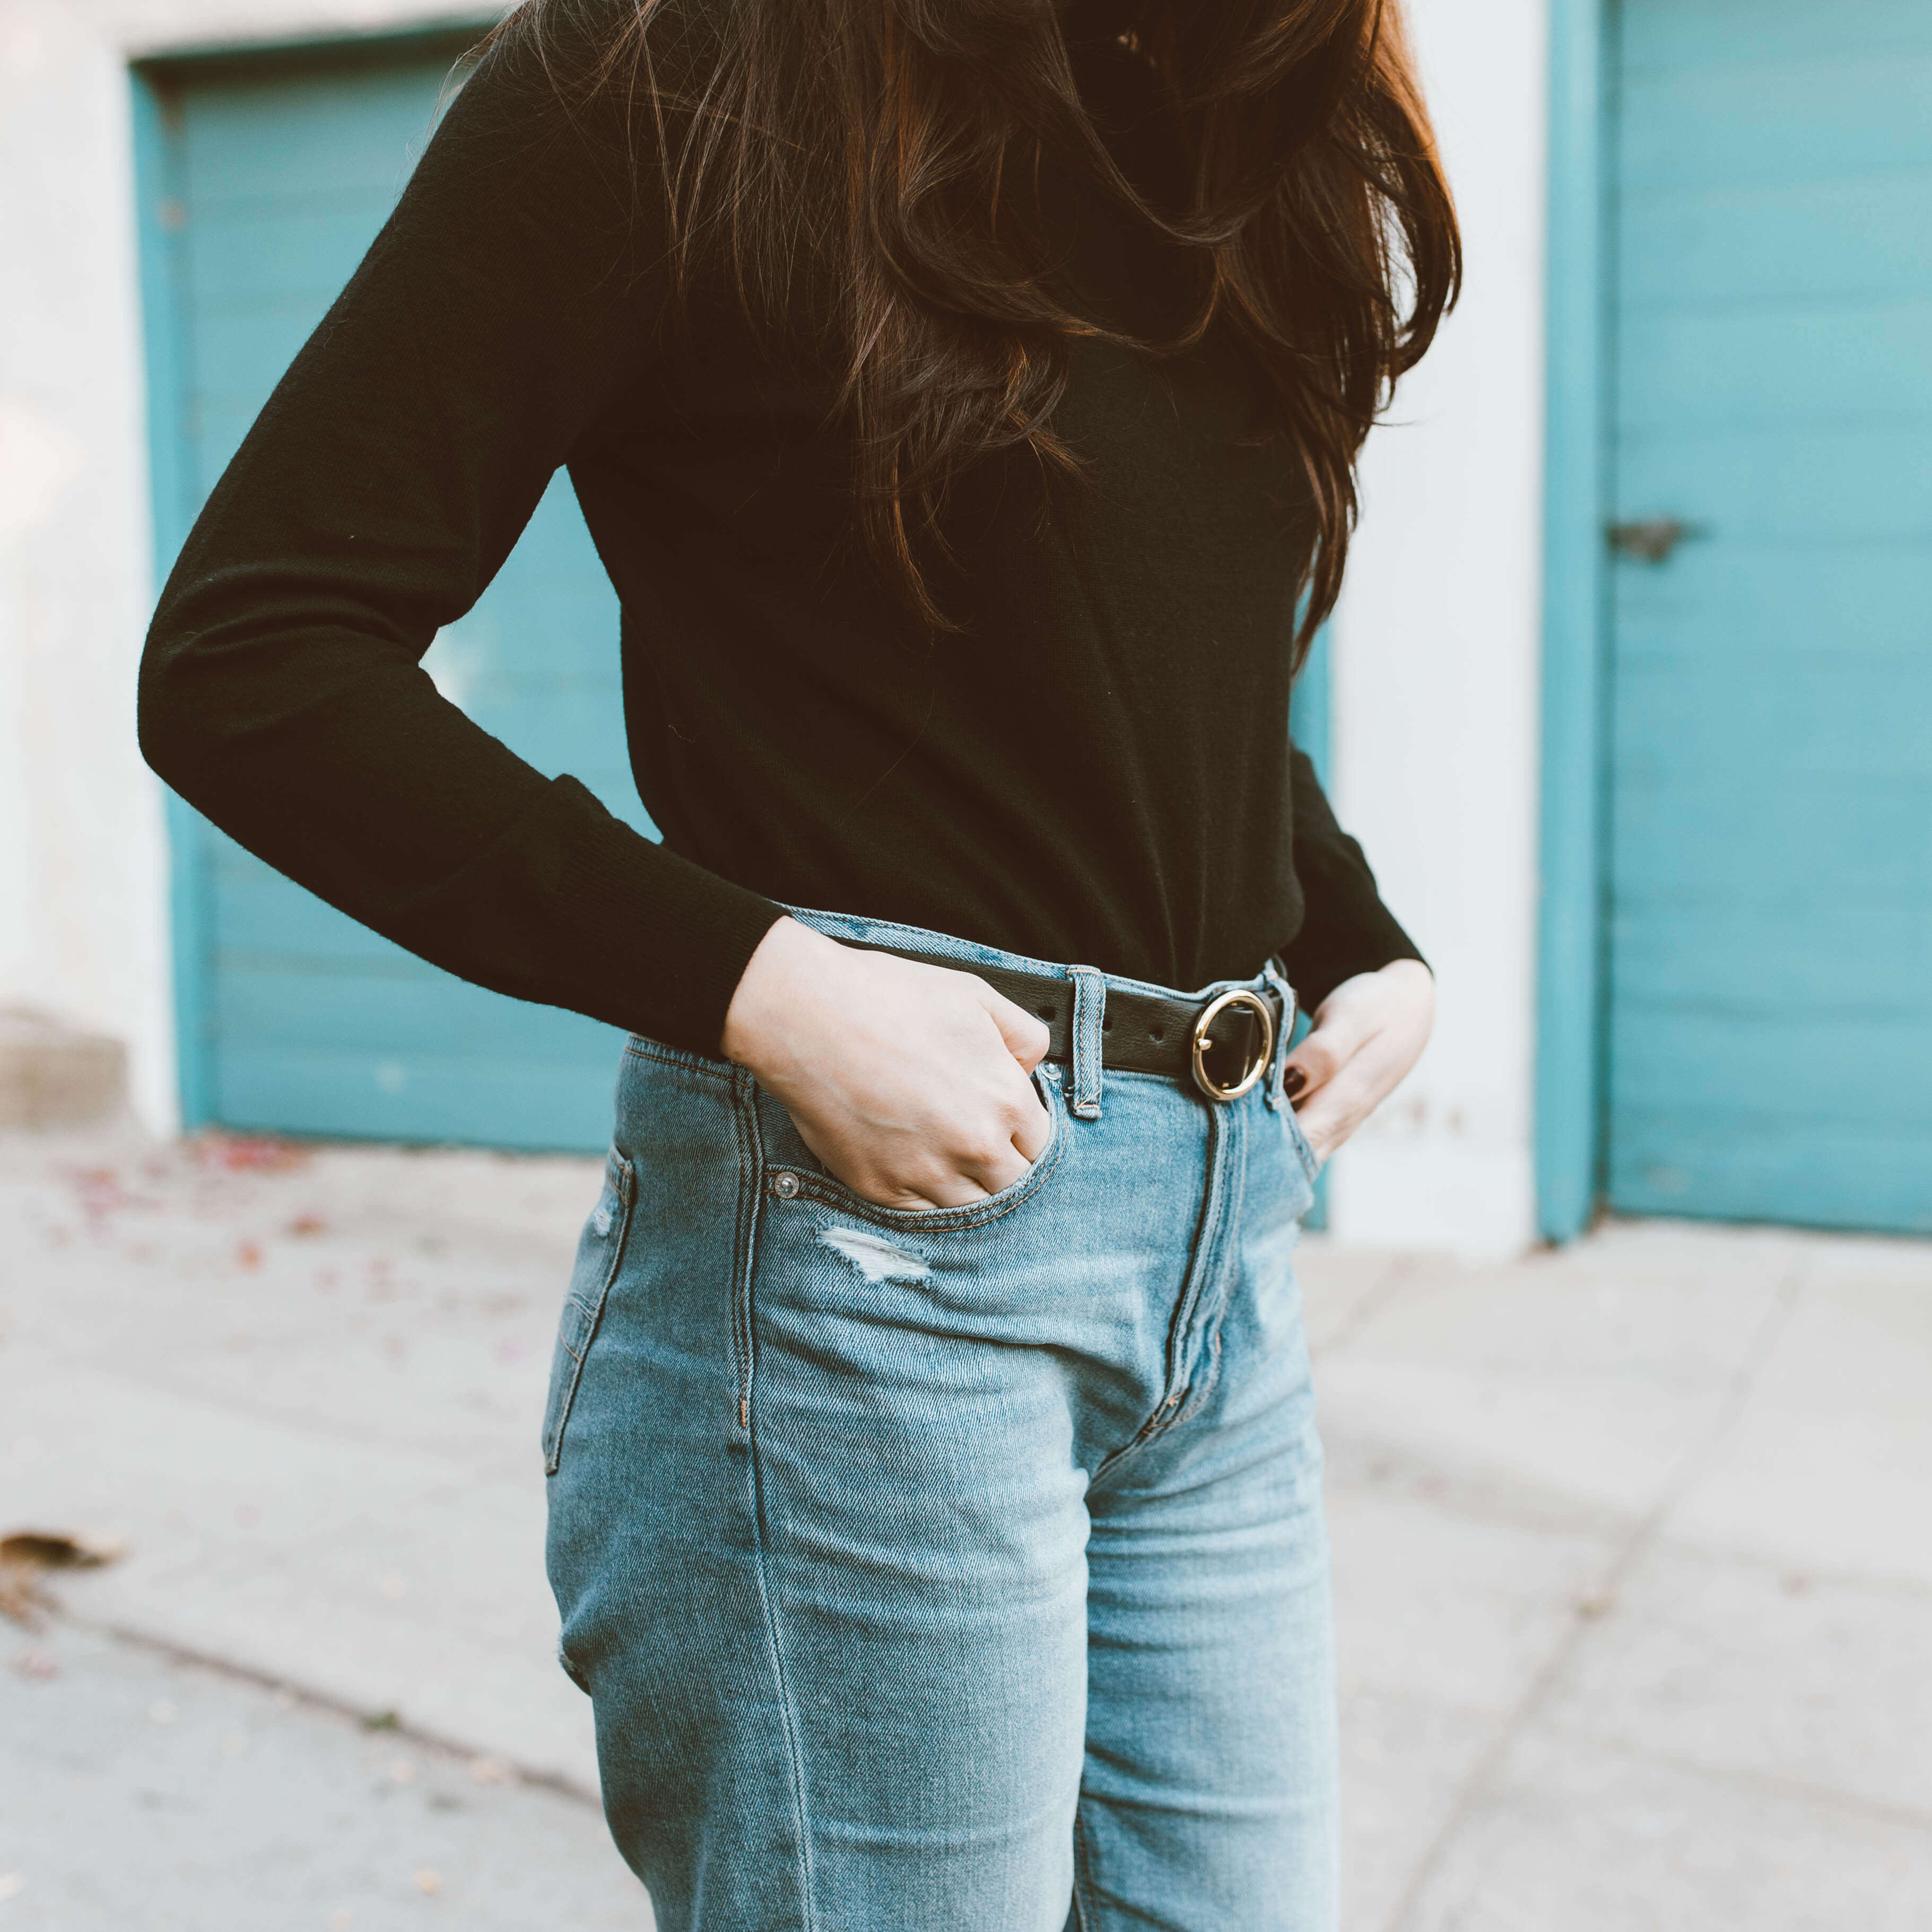 How To Style A Black Turtleneck | Twinspiration